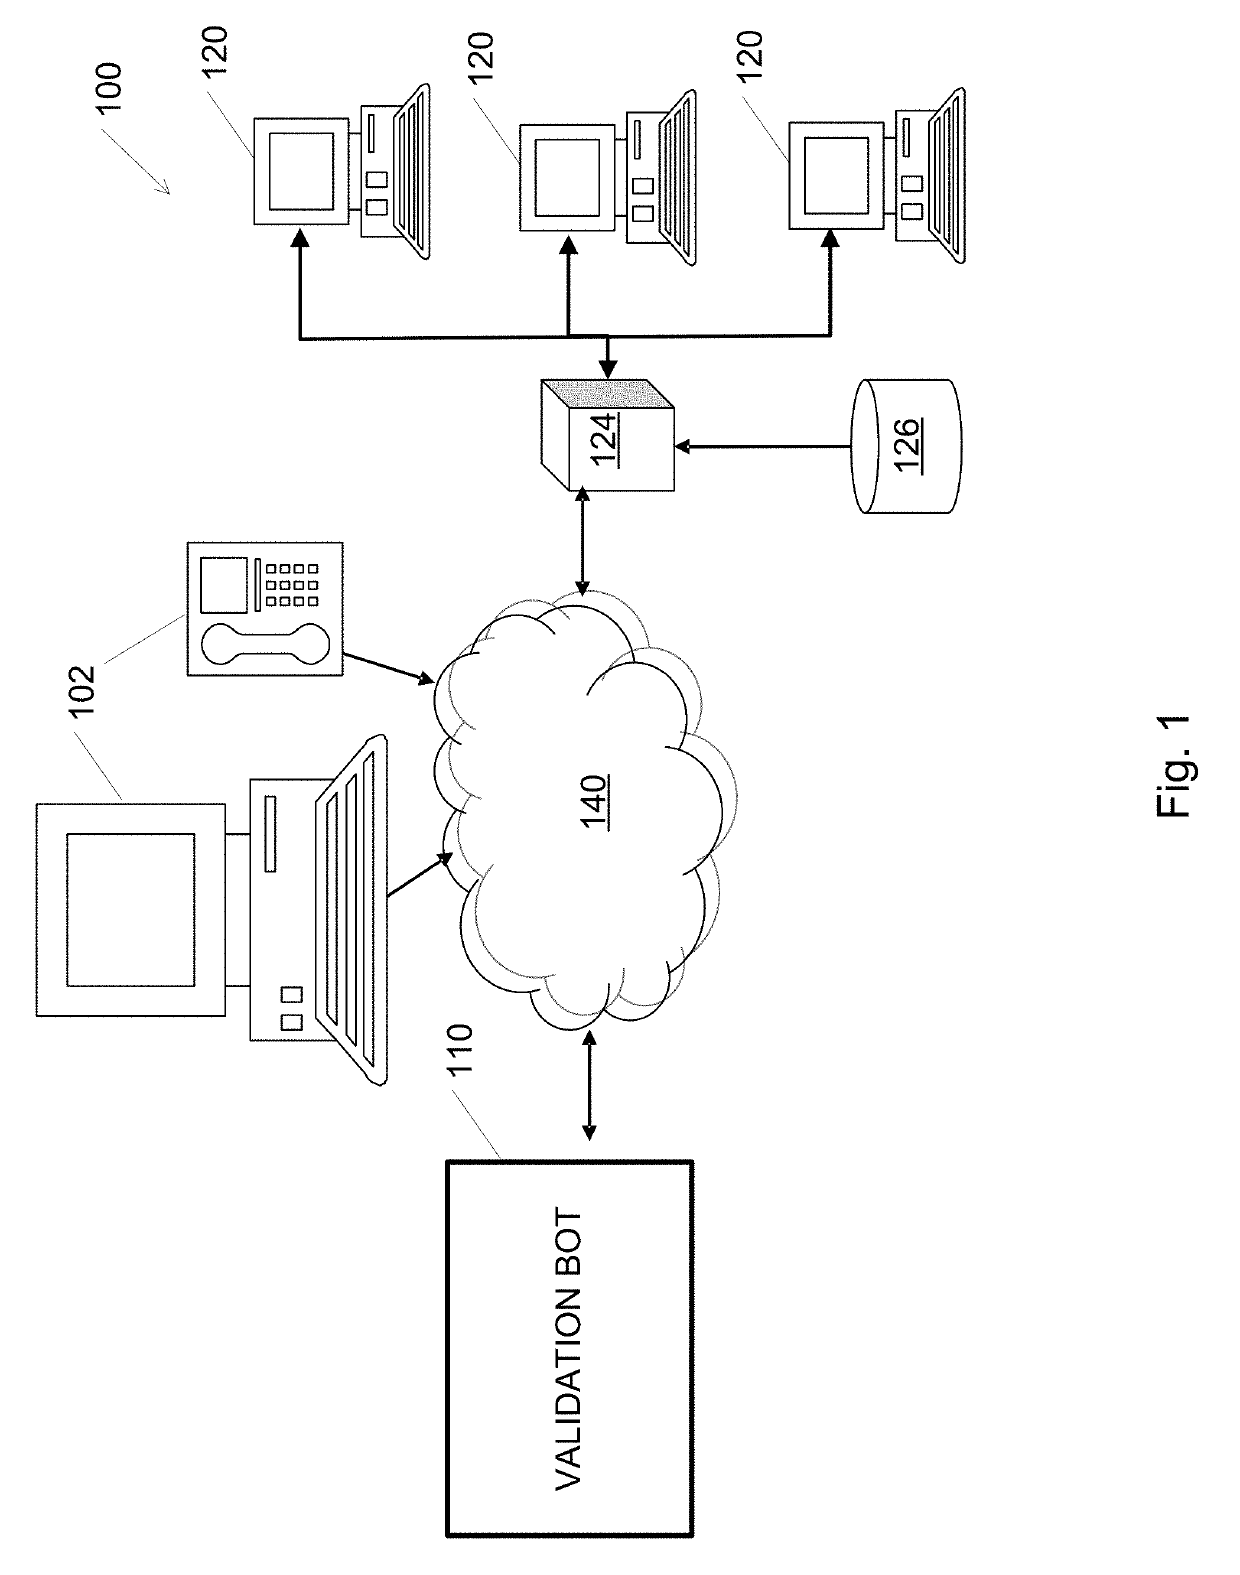 System and method for automatically validating agent implementation of training material